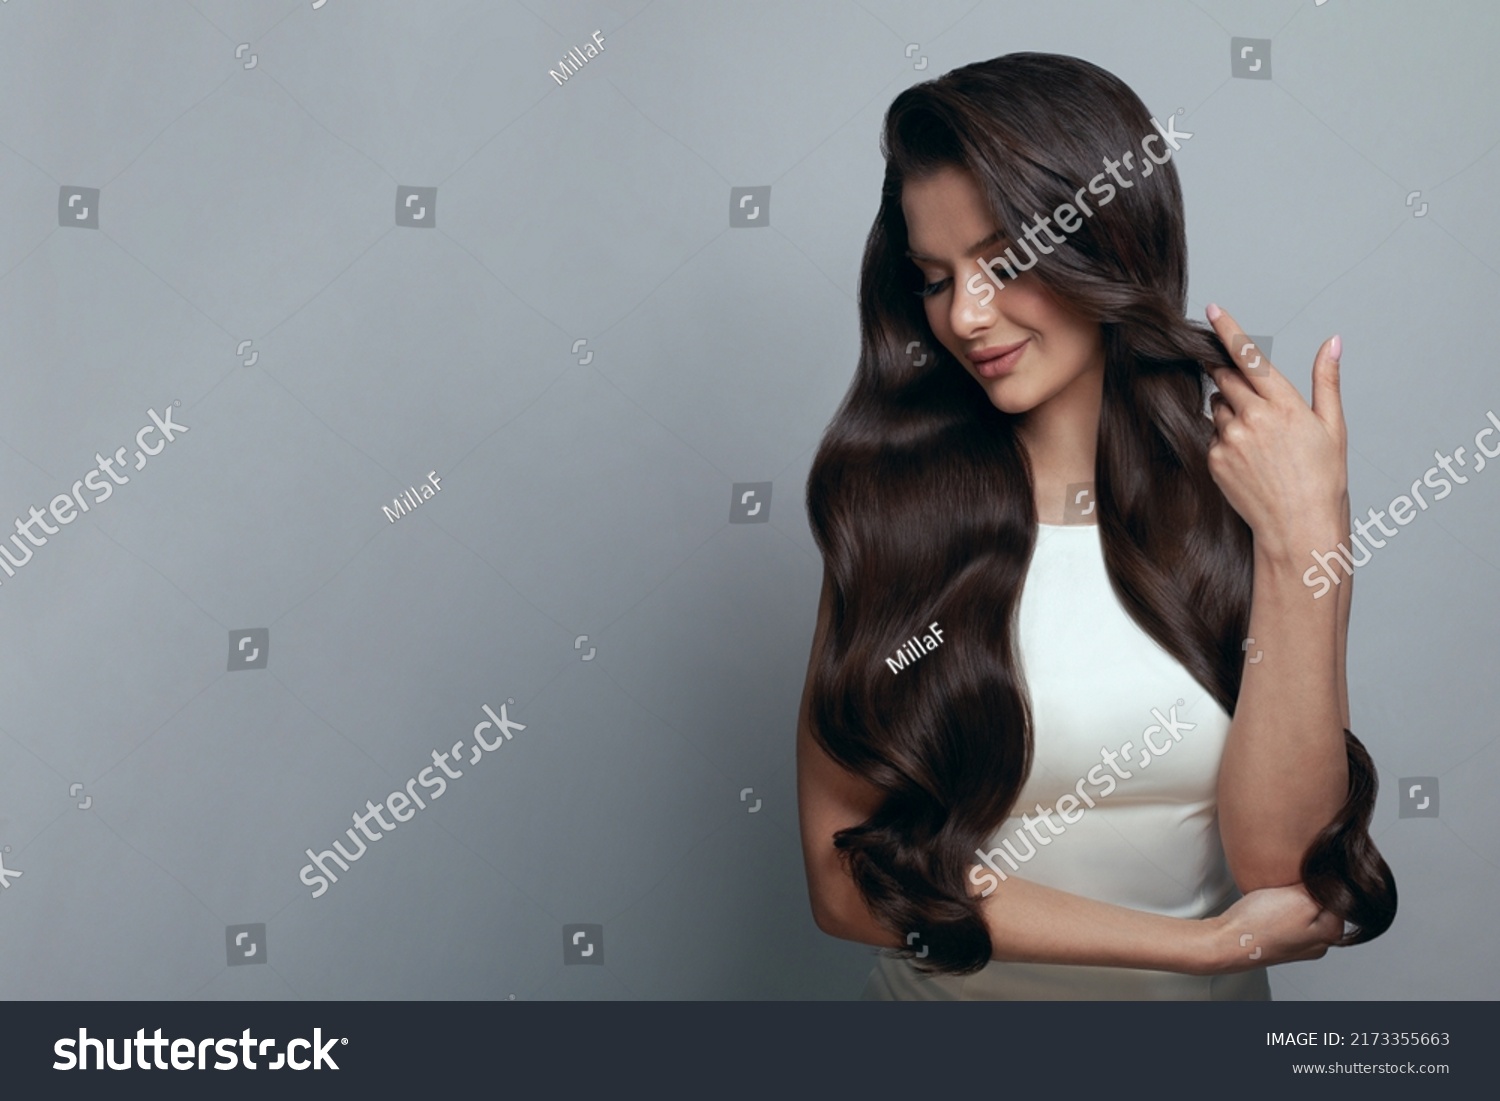 Portrait of elegant stylish young woman with long dark curly healthy shiny hair and makeup on grey banner background #2173355663